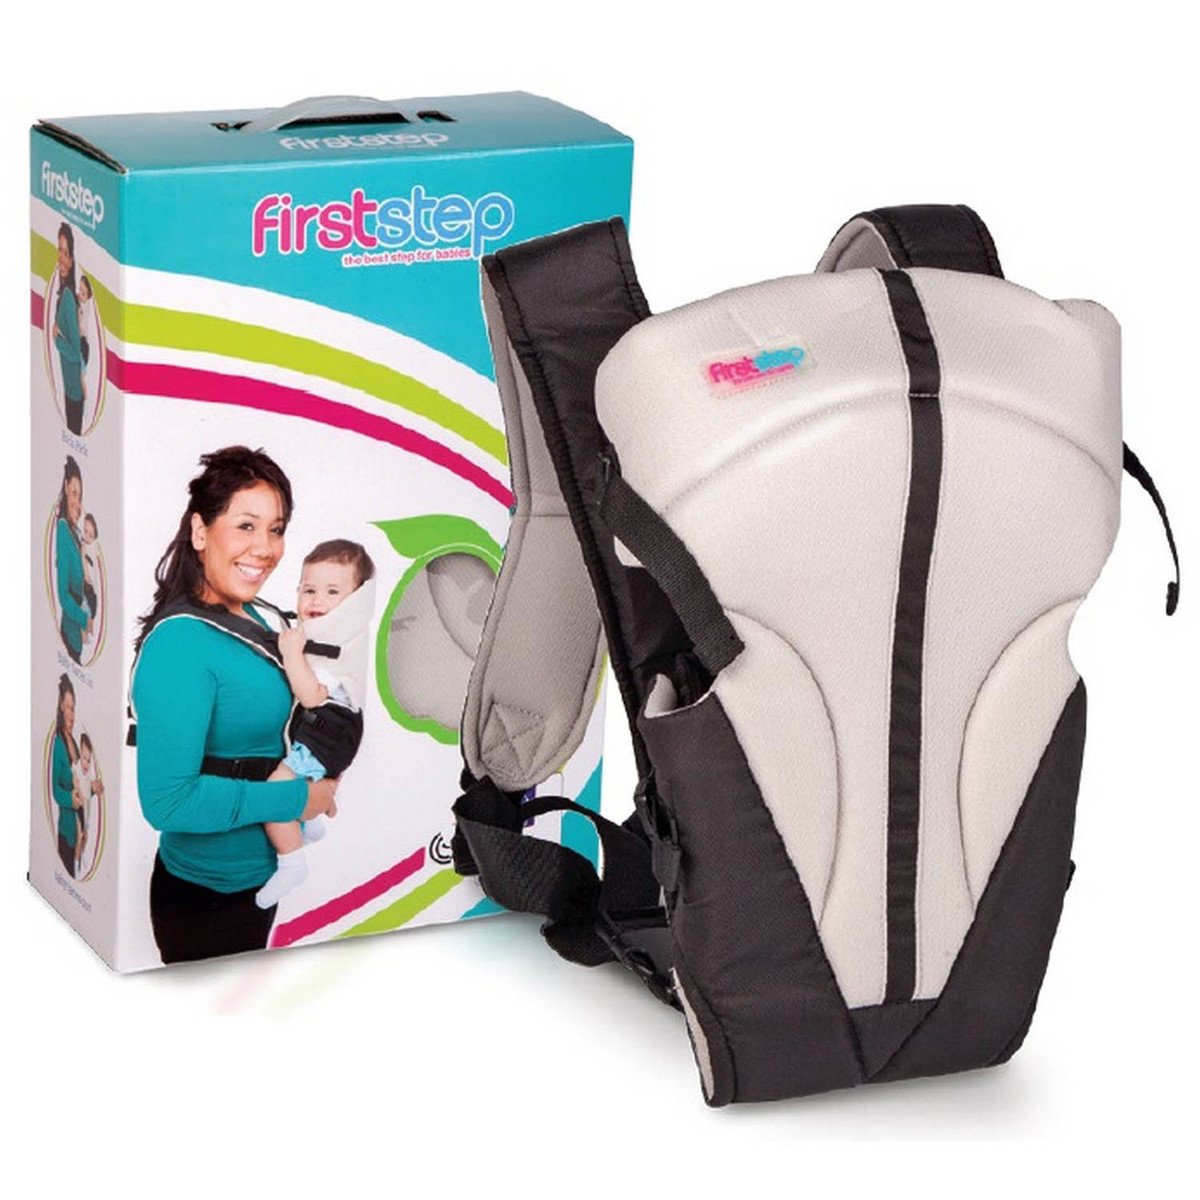 First Step Baby Carrier 3in1 Assorted Colors